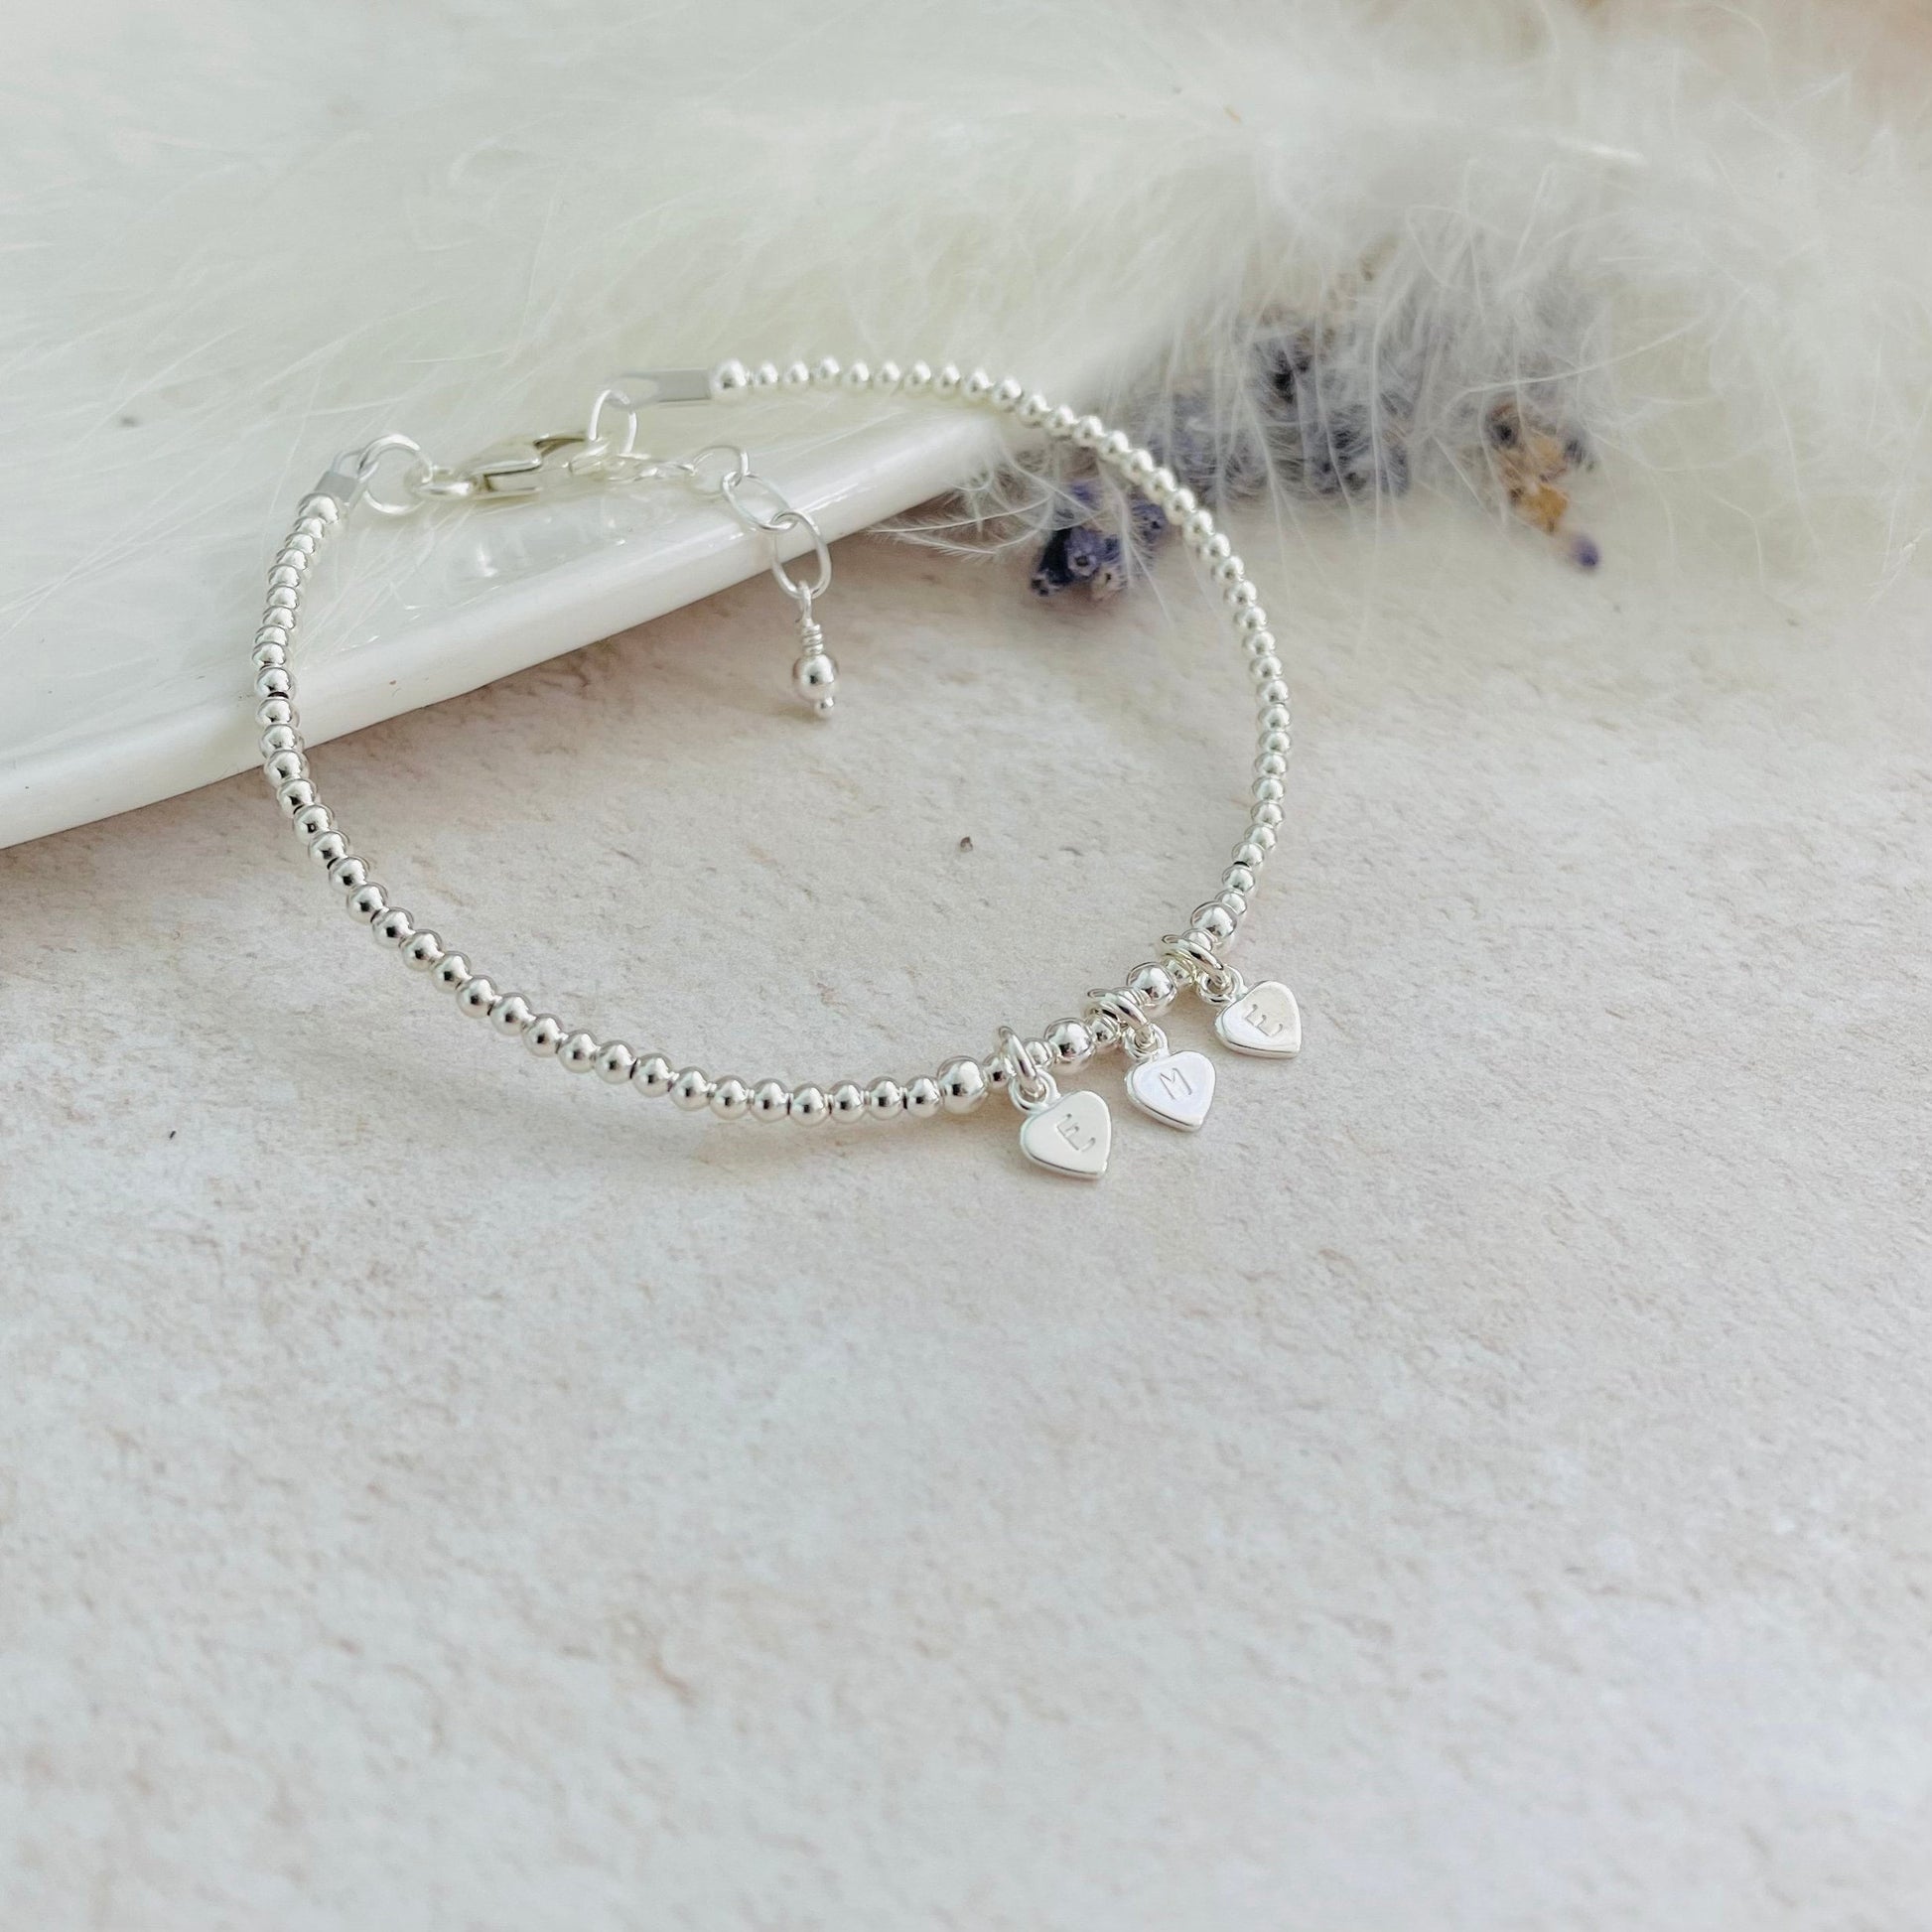 Tiny Sterling Silver Hearts Personalised Bracelet with Family Initials